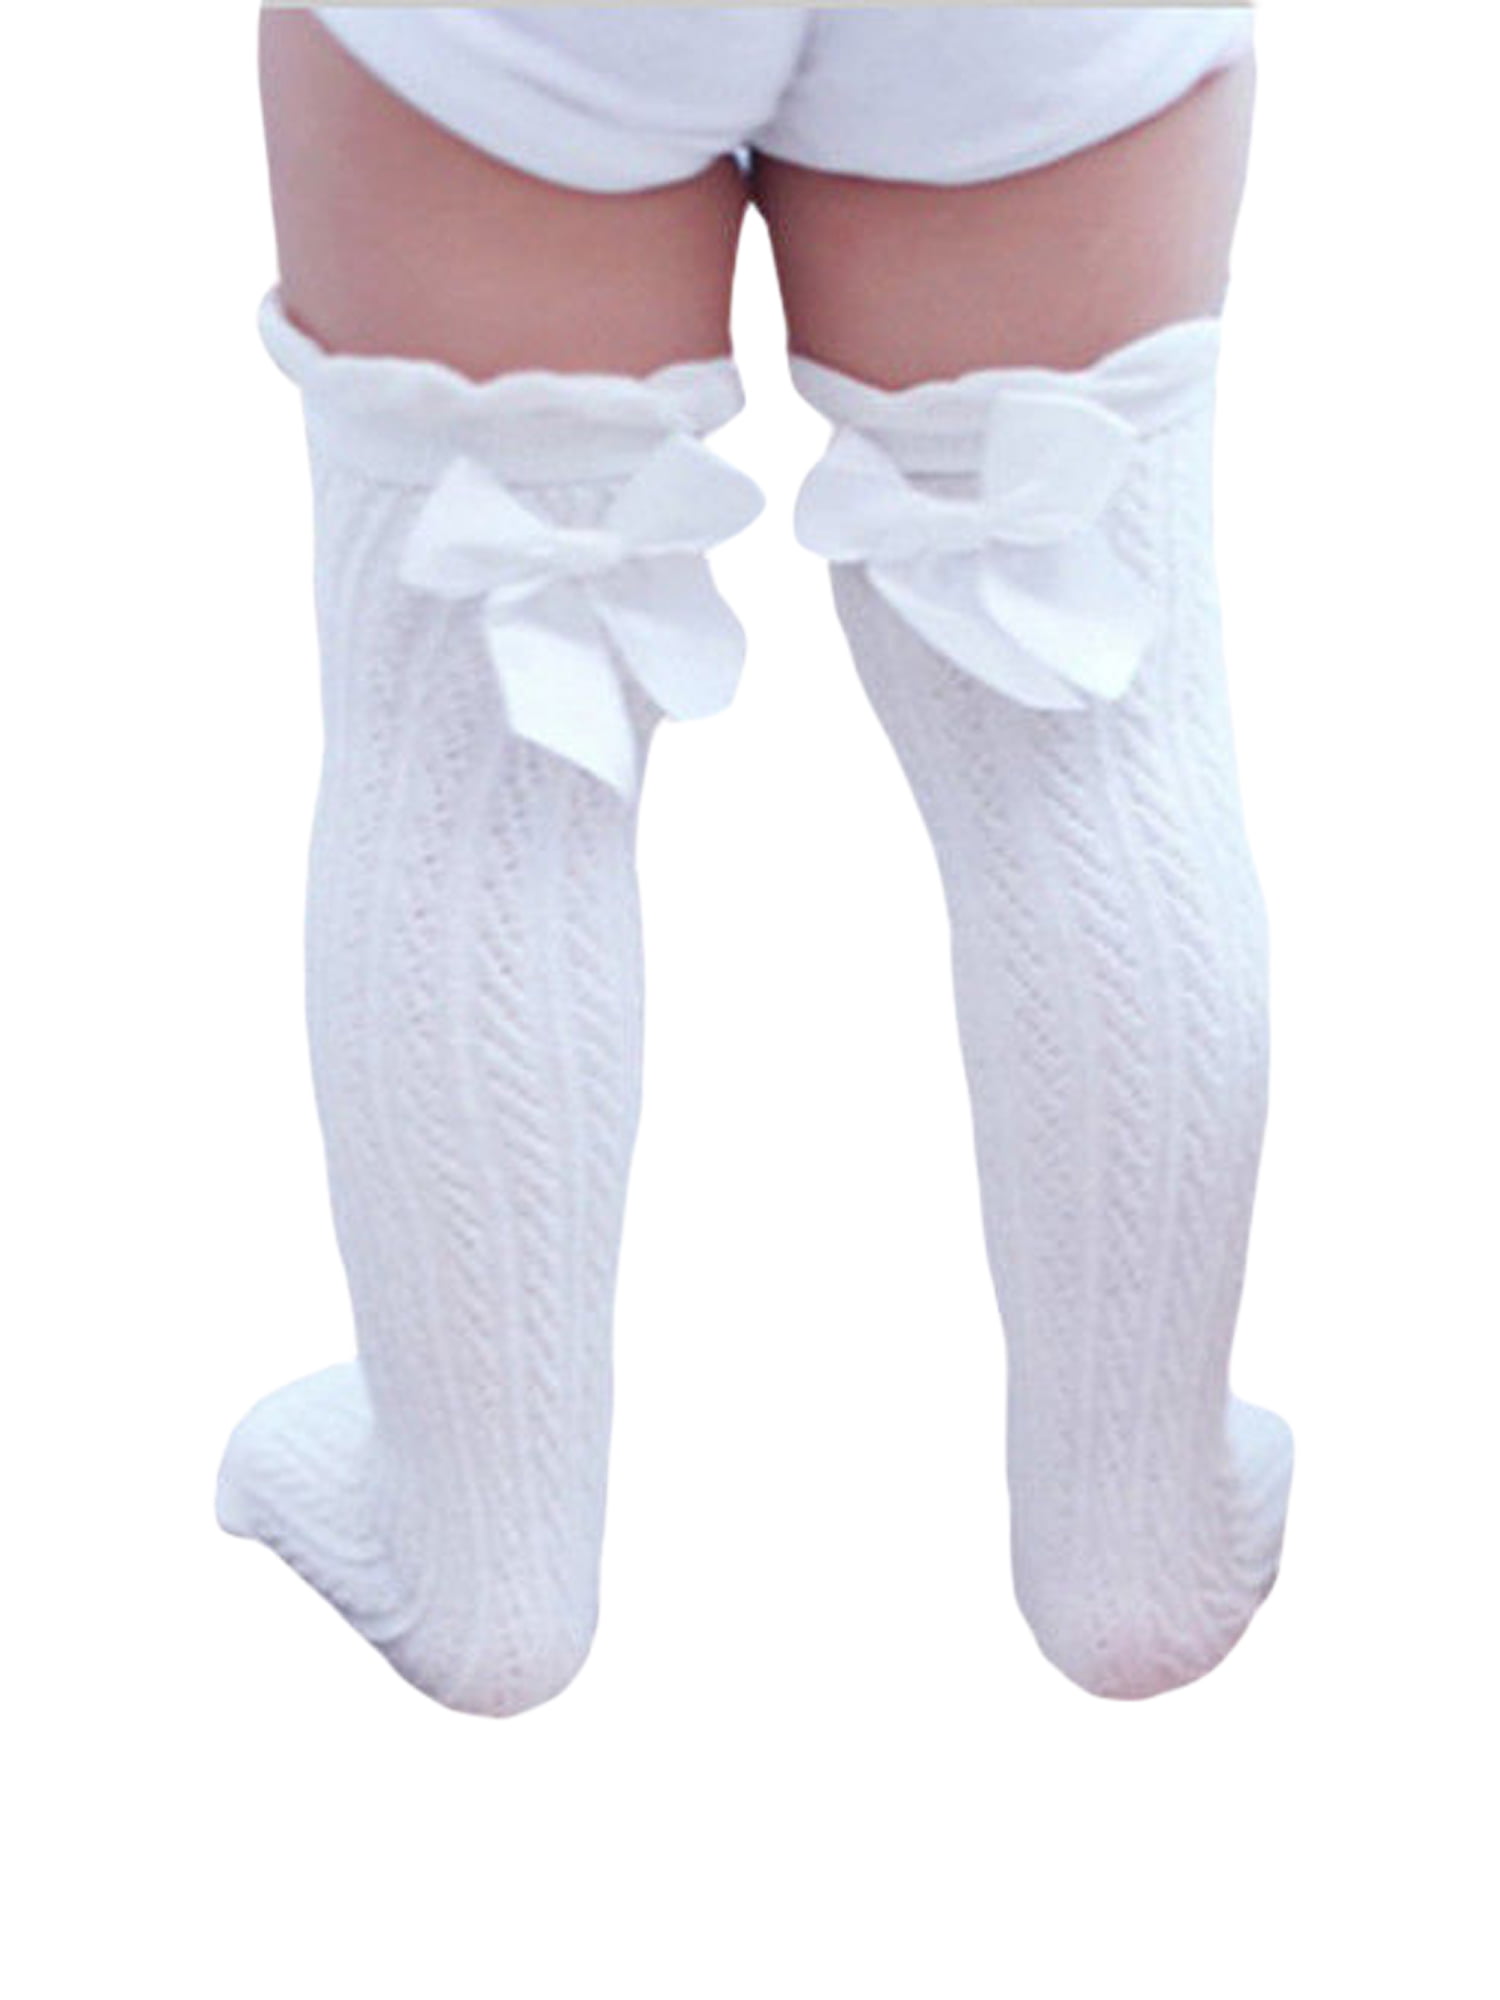 Baby knee high socks with bows